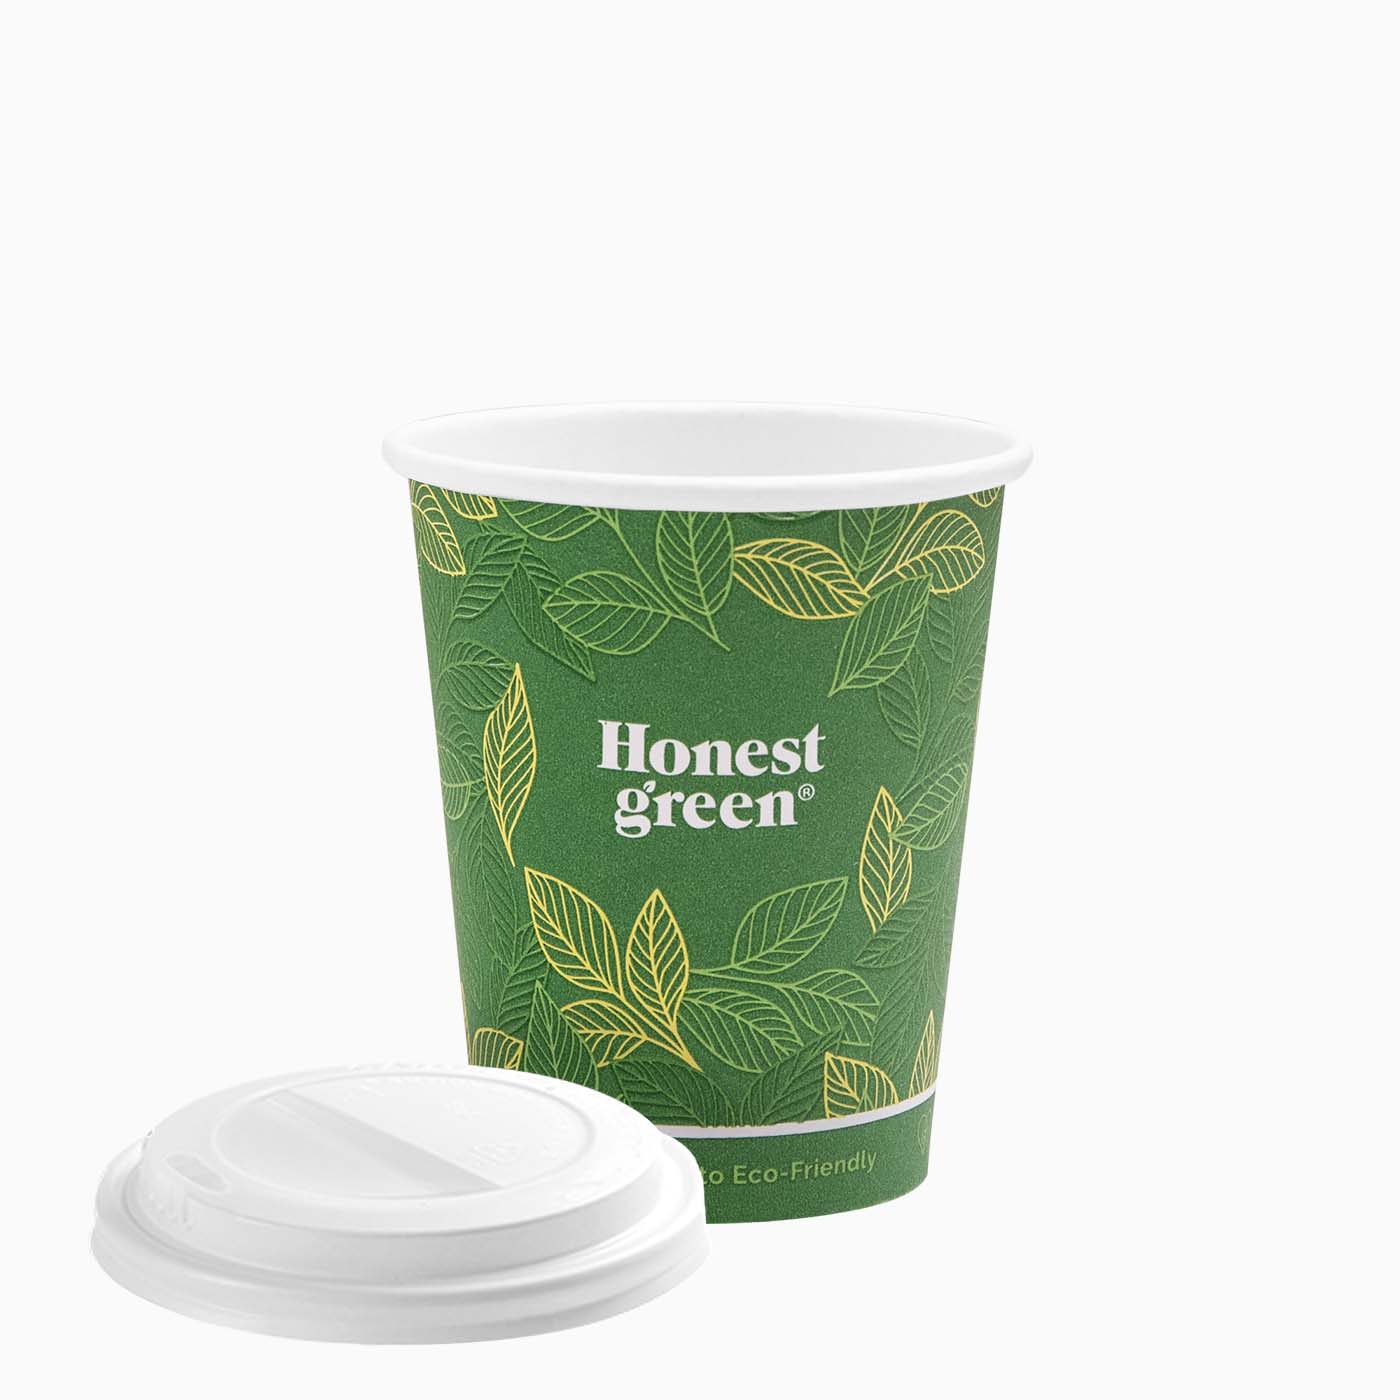 Eco Green cardboard glass with medium Drink Cover